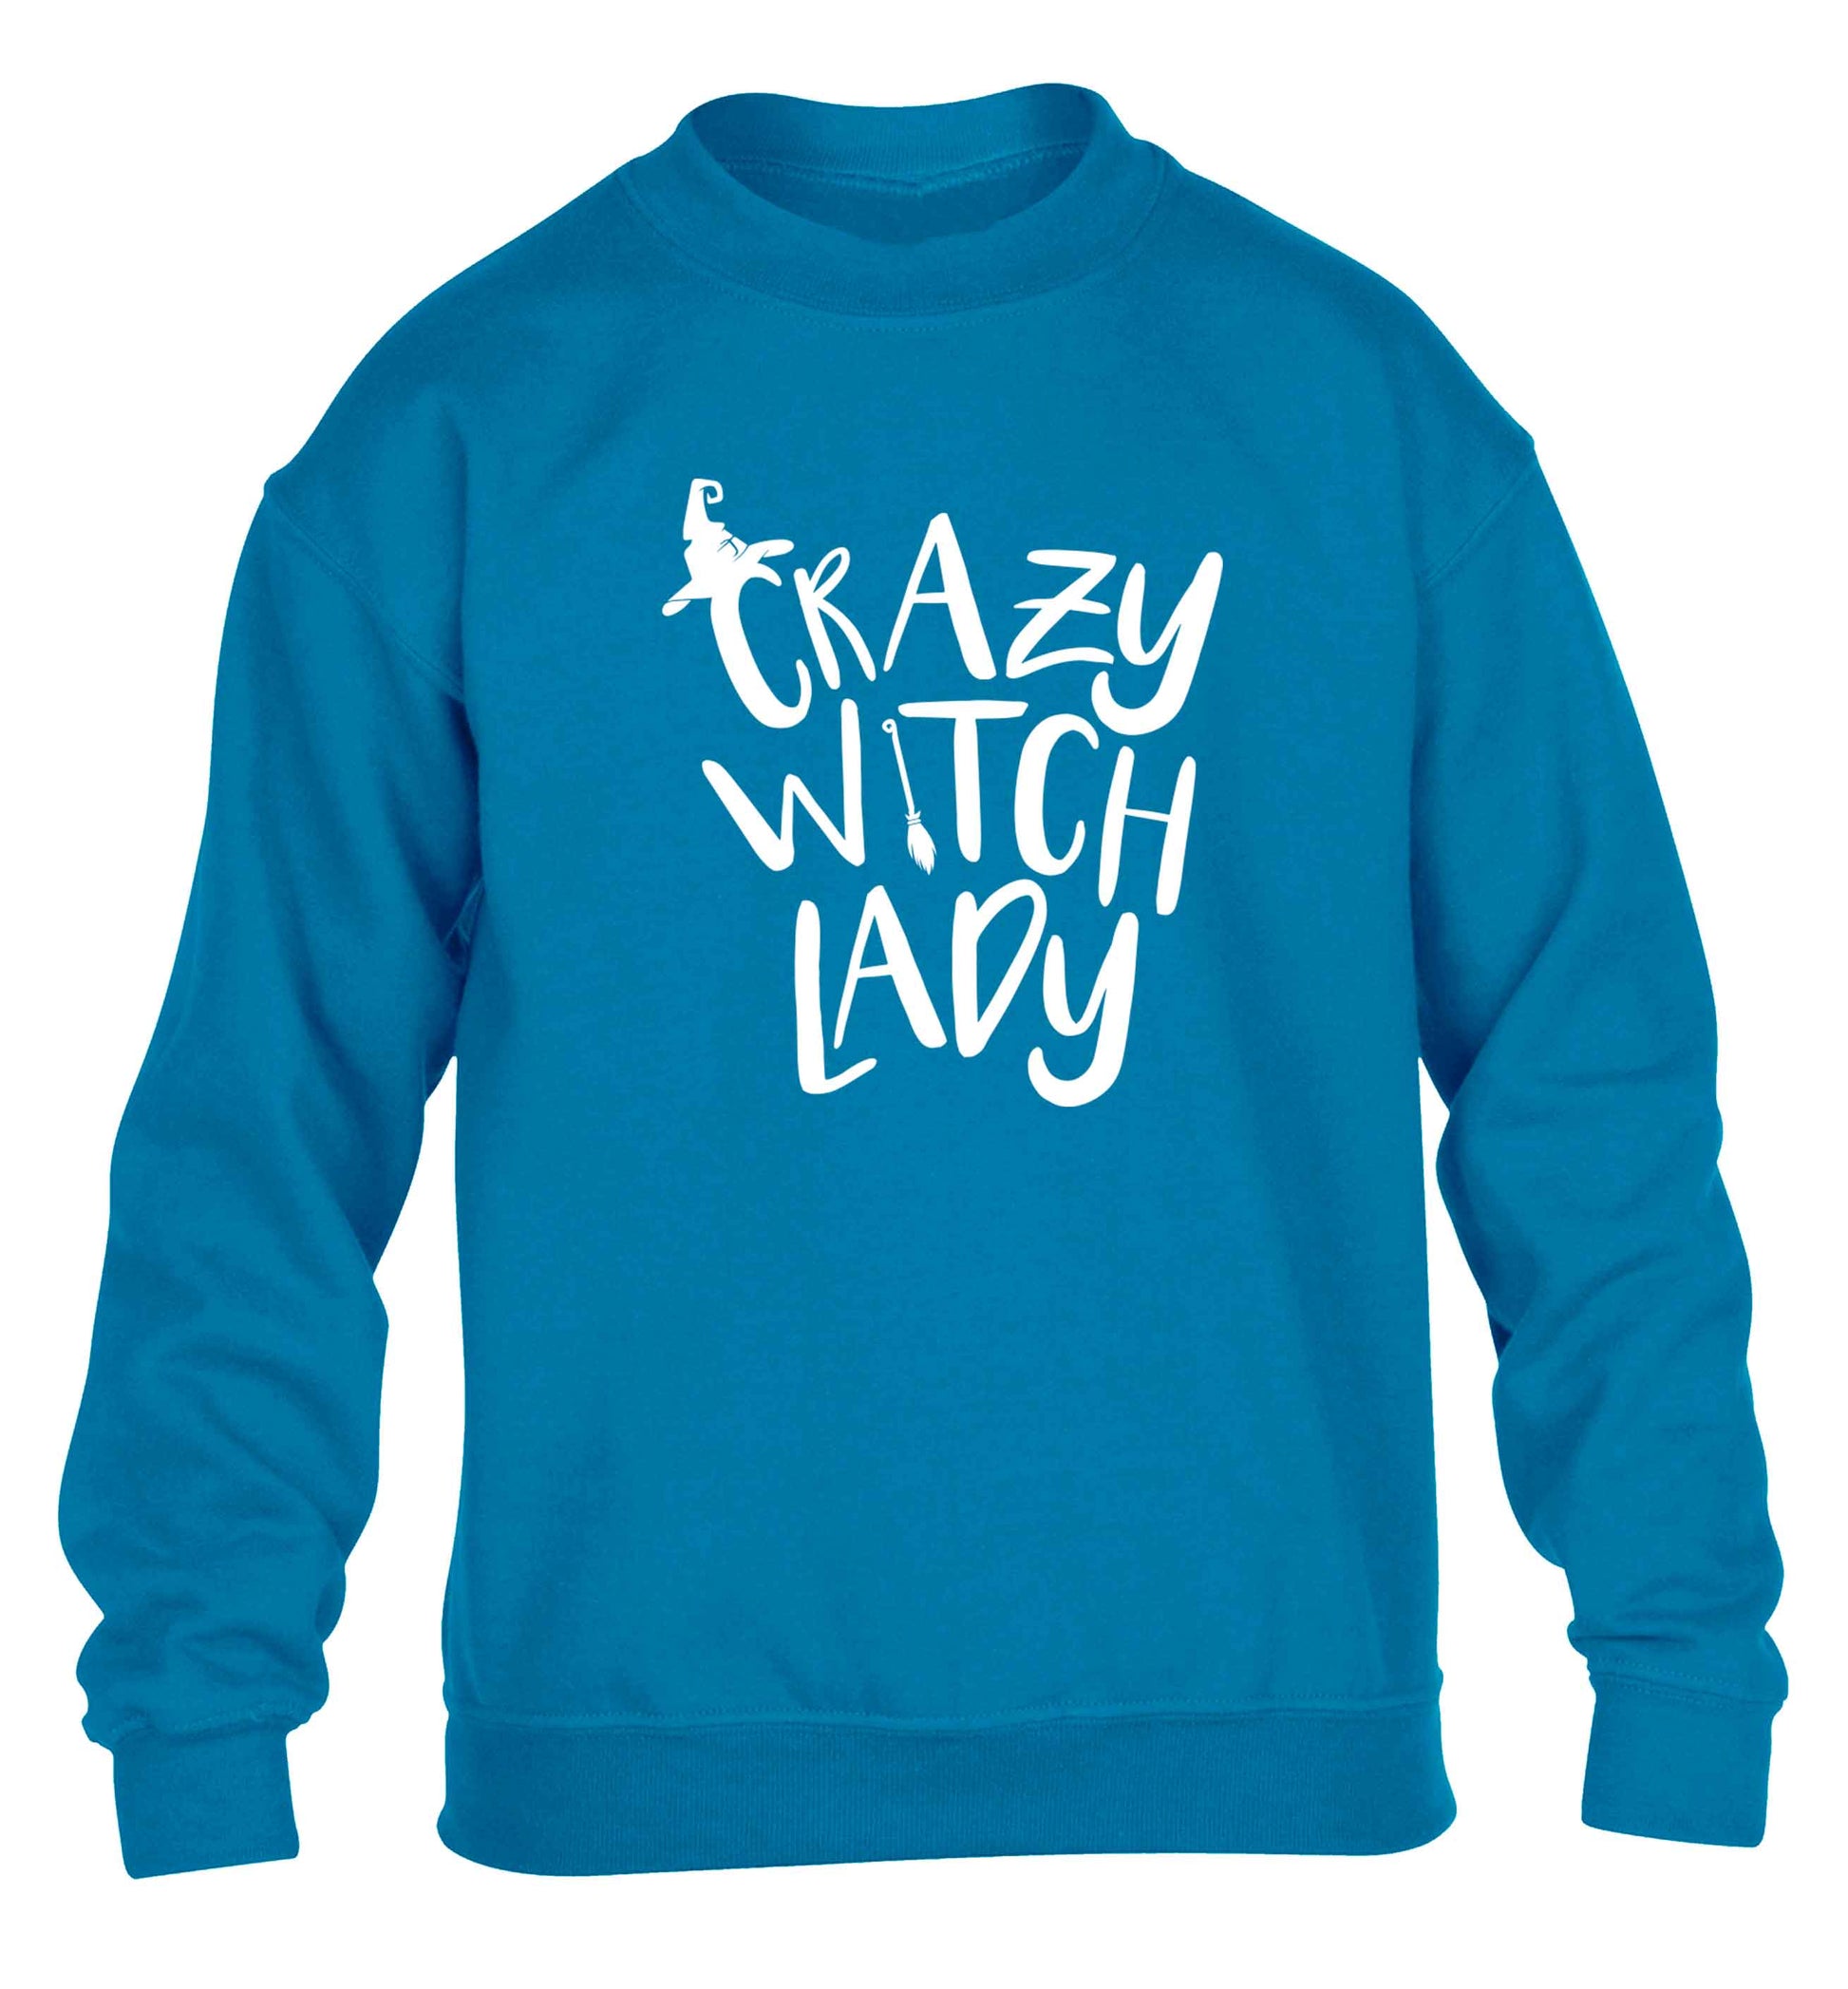 Crazy witch lady children's blue sweater 12-13 Years